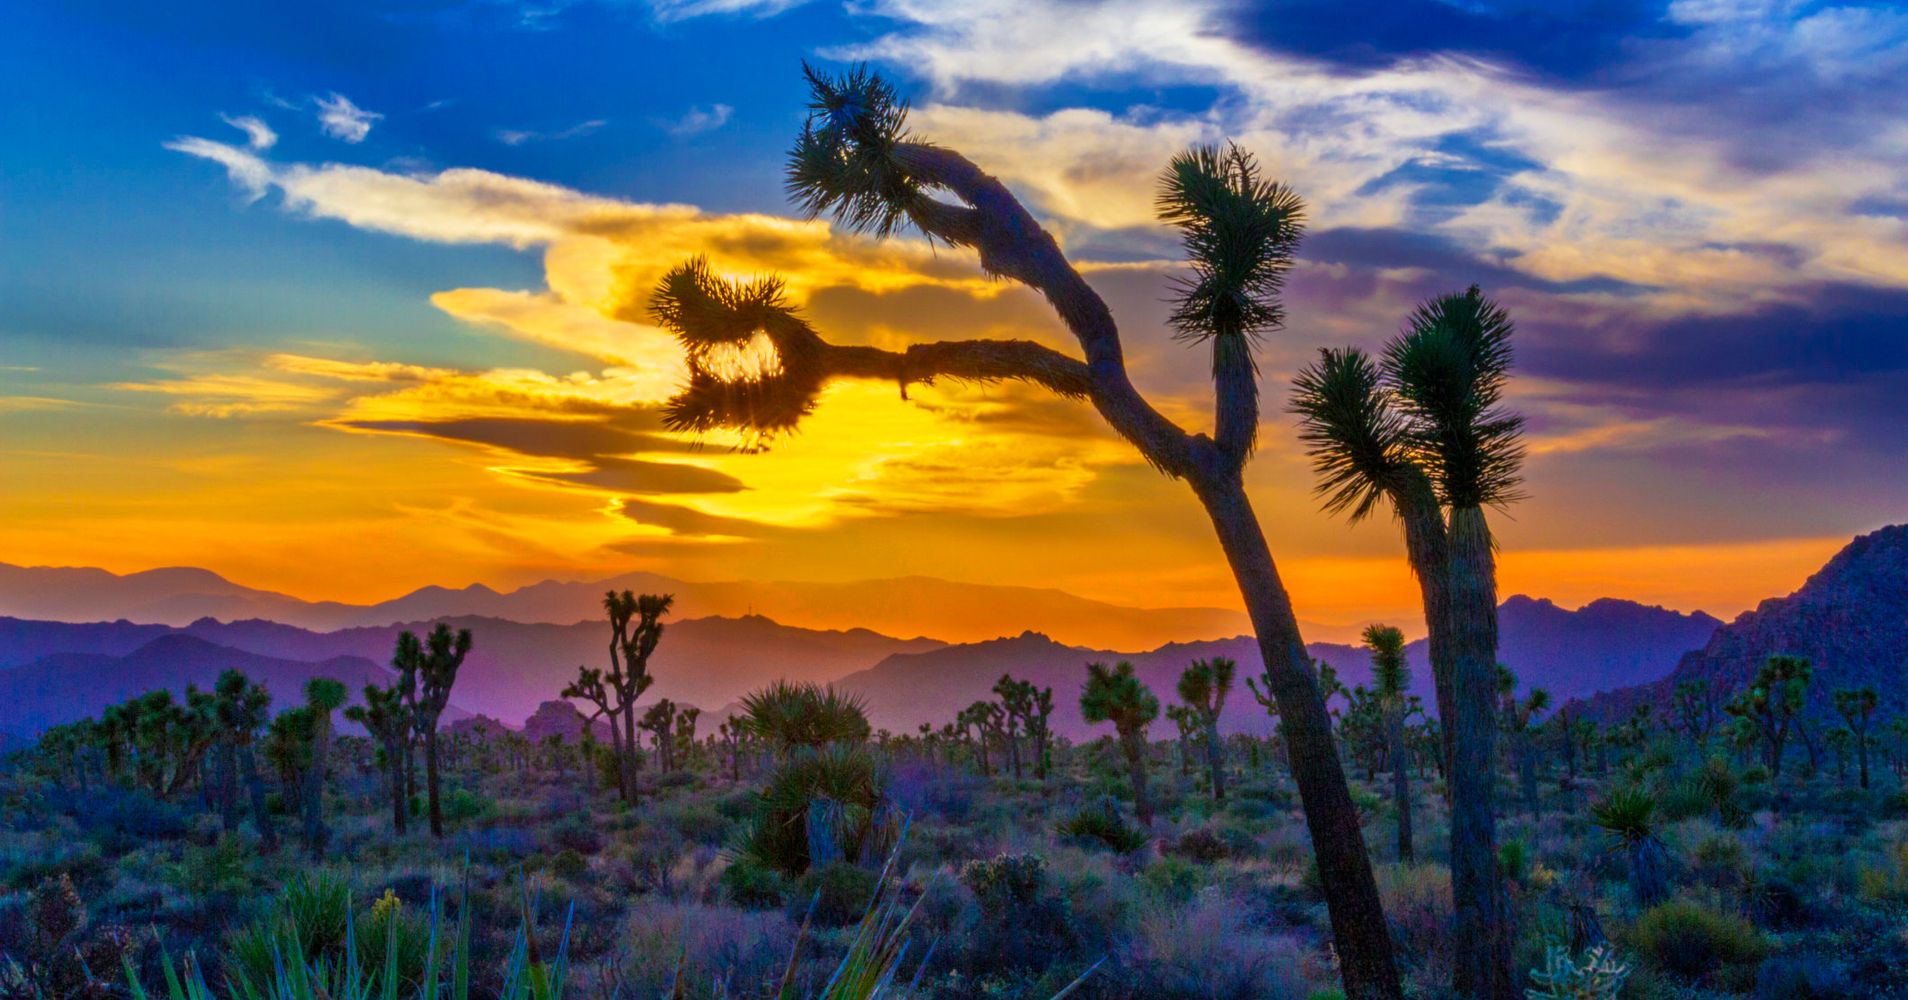 Joshua Tree National Park Is The Most Beautiful Place In